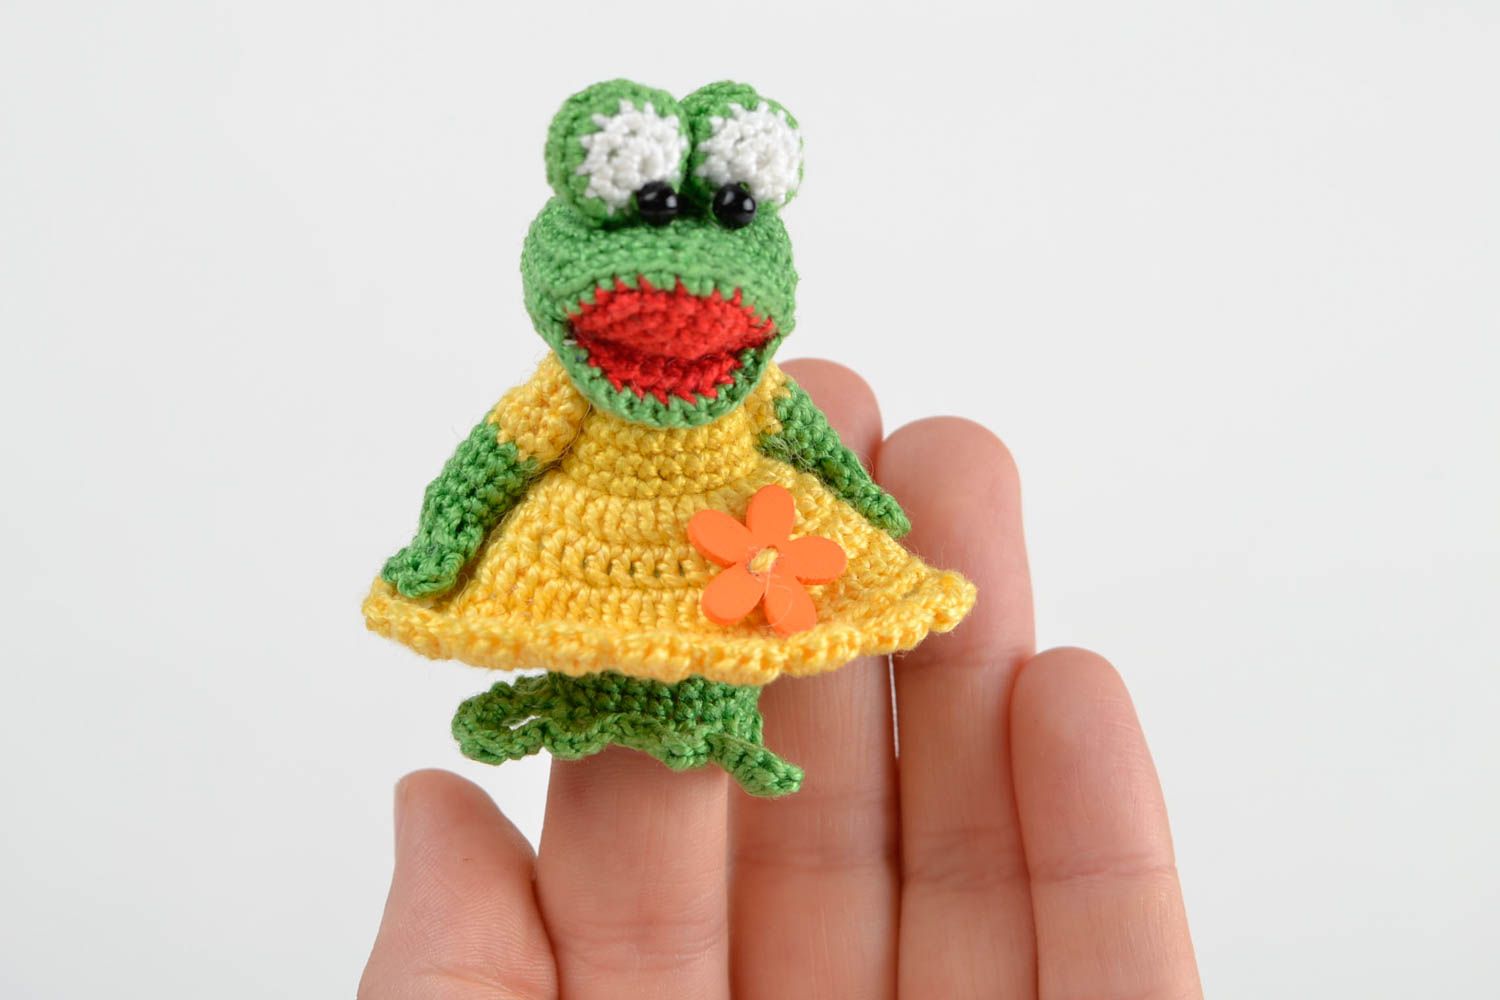 Handmade toy crocheted toys for children gift ideas unusual soft toys photo 2